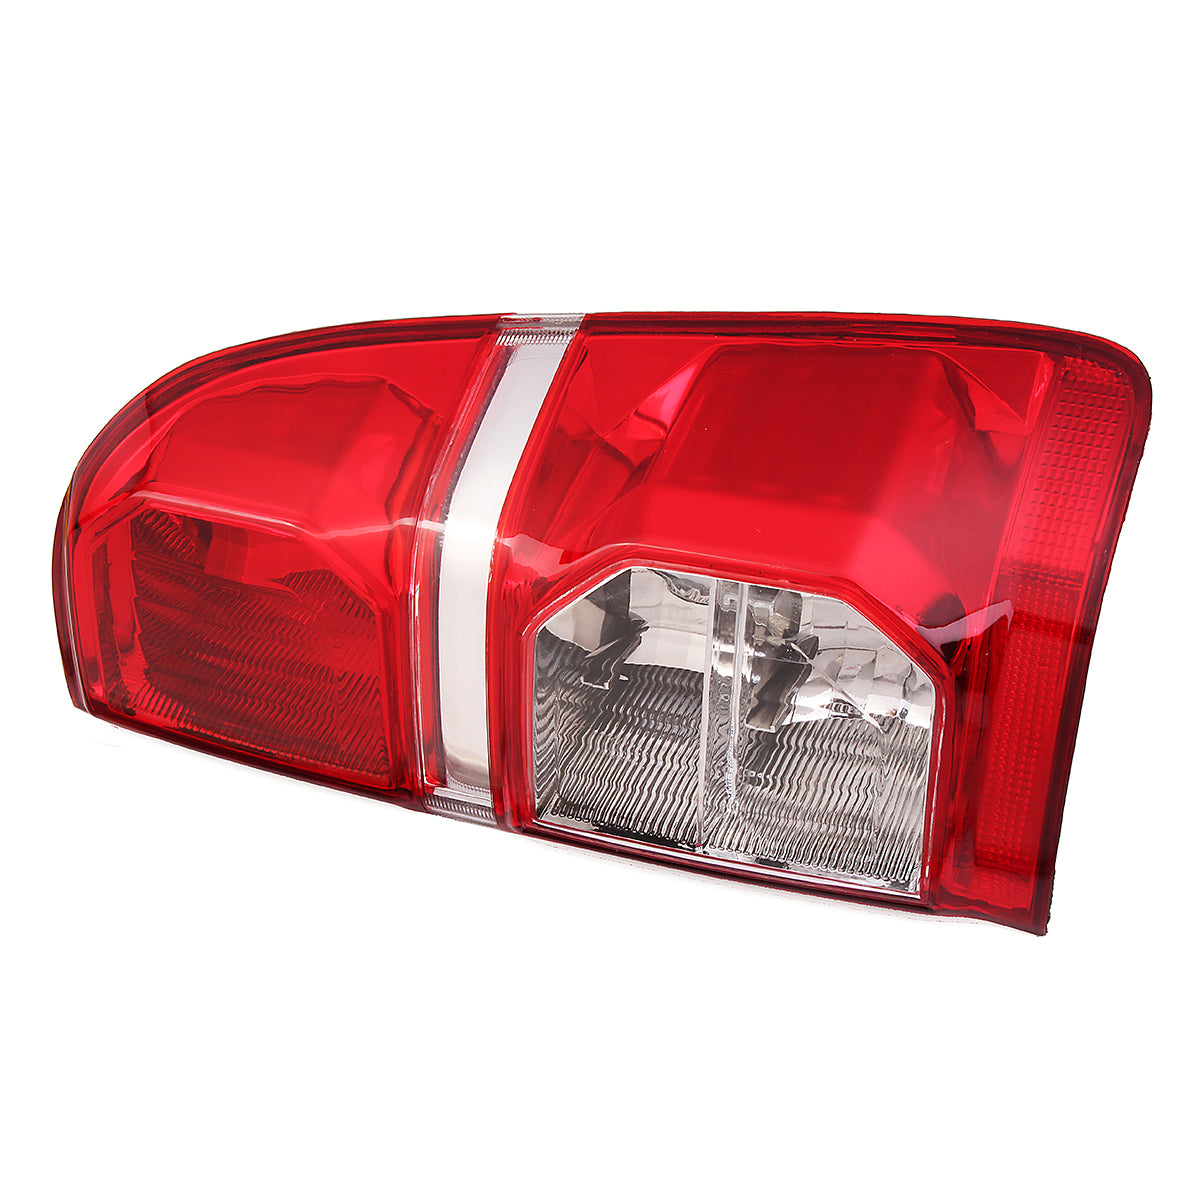 Firebrick Car Rear Left/Right Tail Light Brake Lamp Red withou Bulb For Toyota Hilux 2005-2015